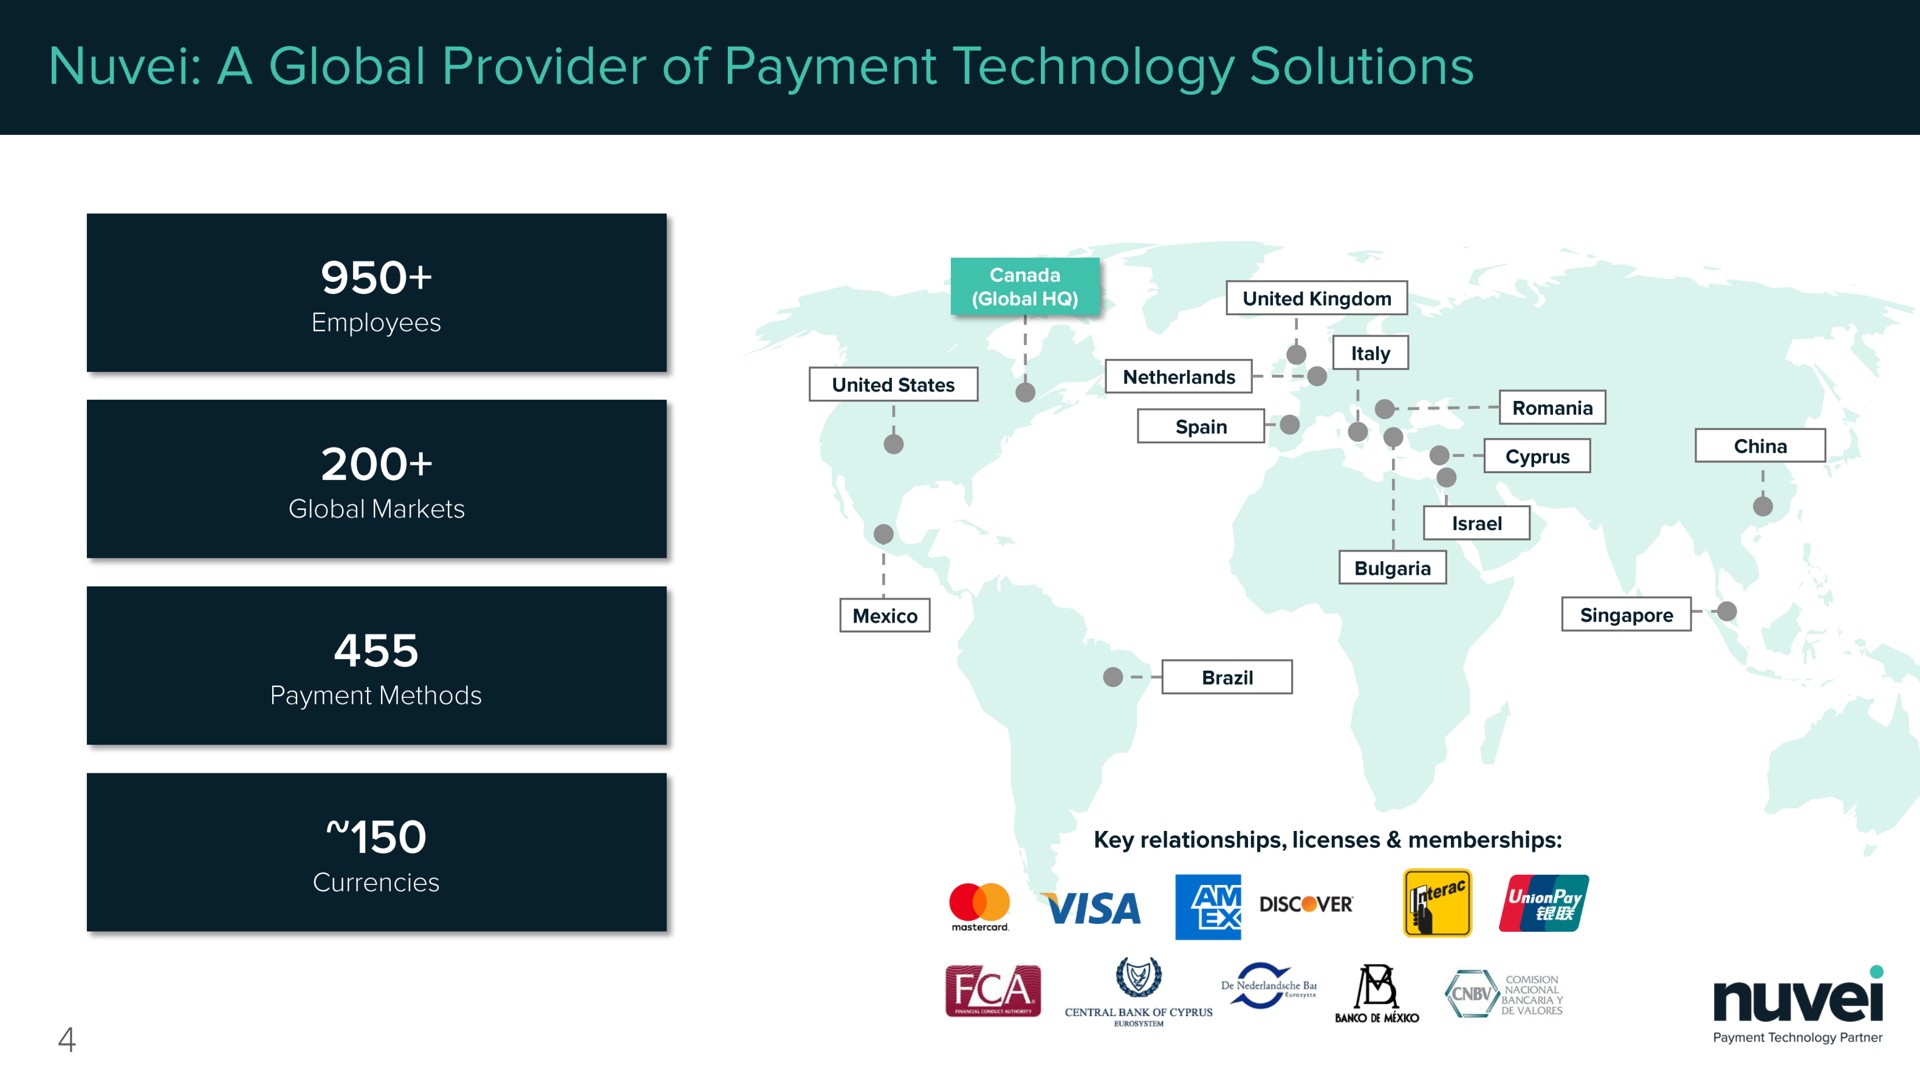 a global provider of payment technology solutions cas | Nuvei